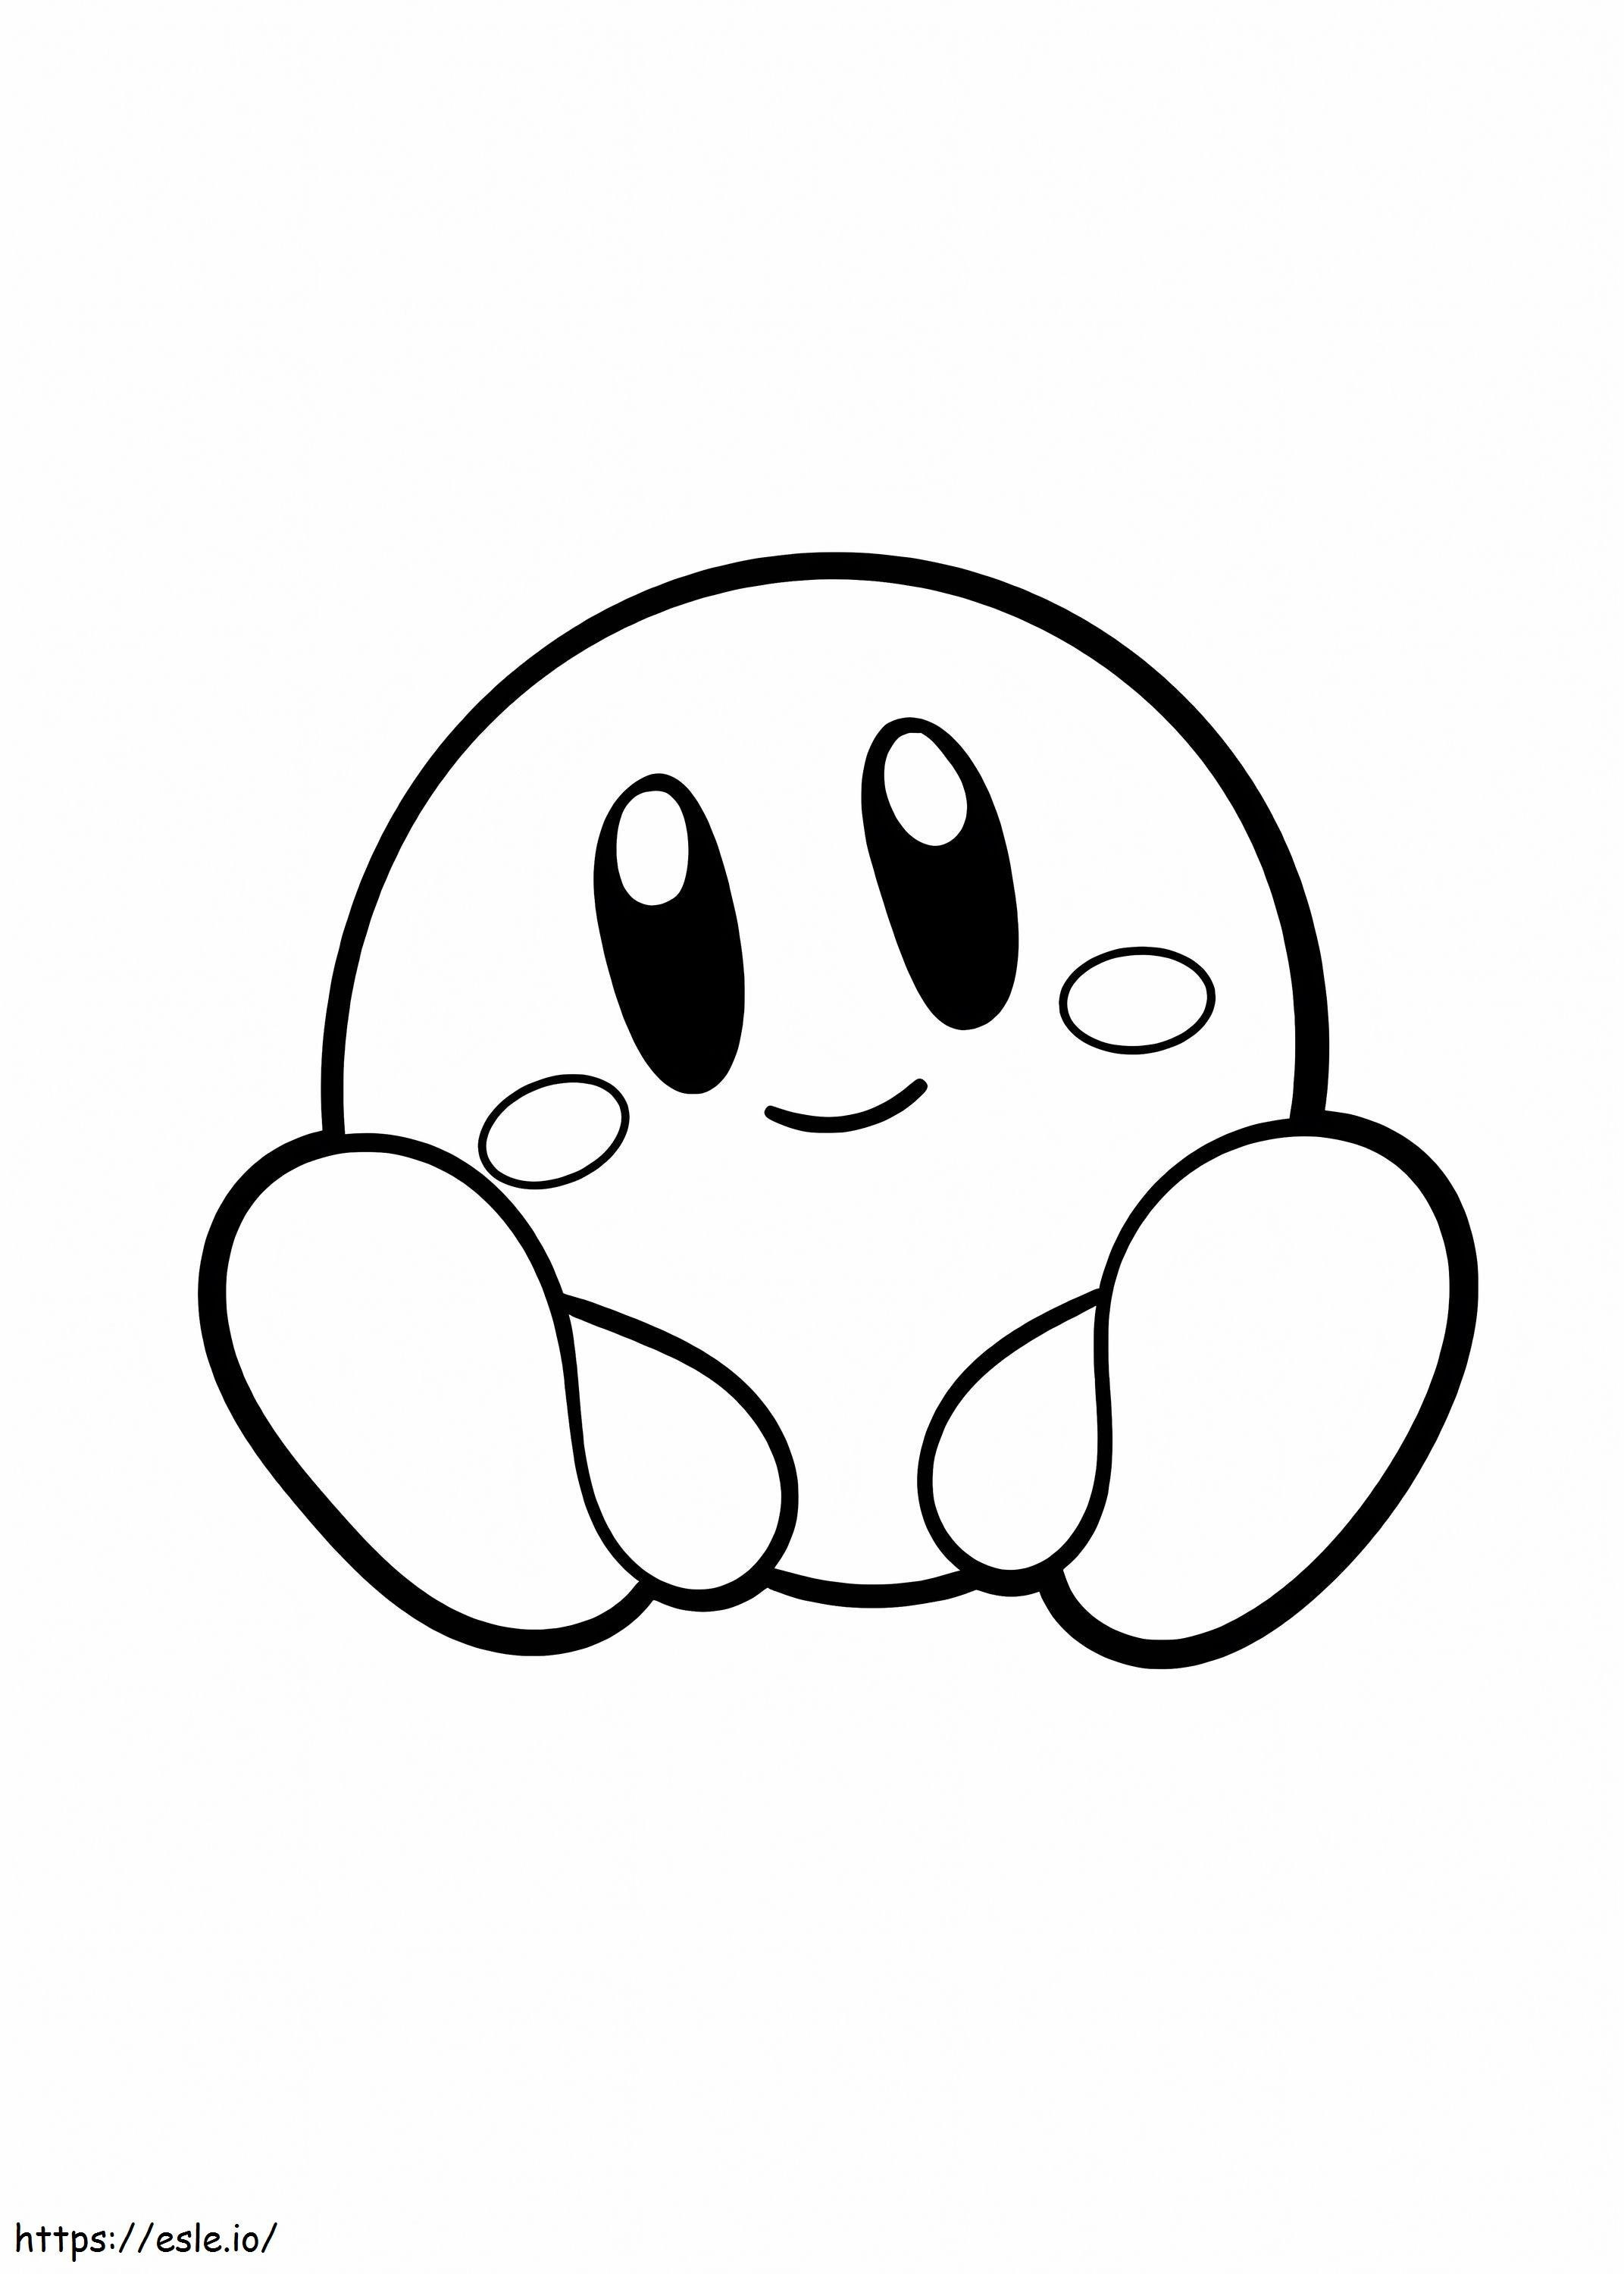 Sitting Kirby coloring page